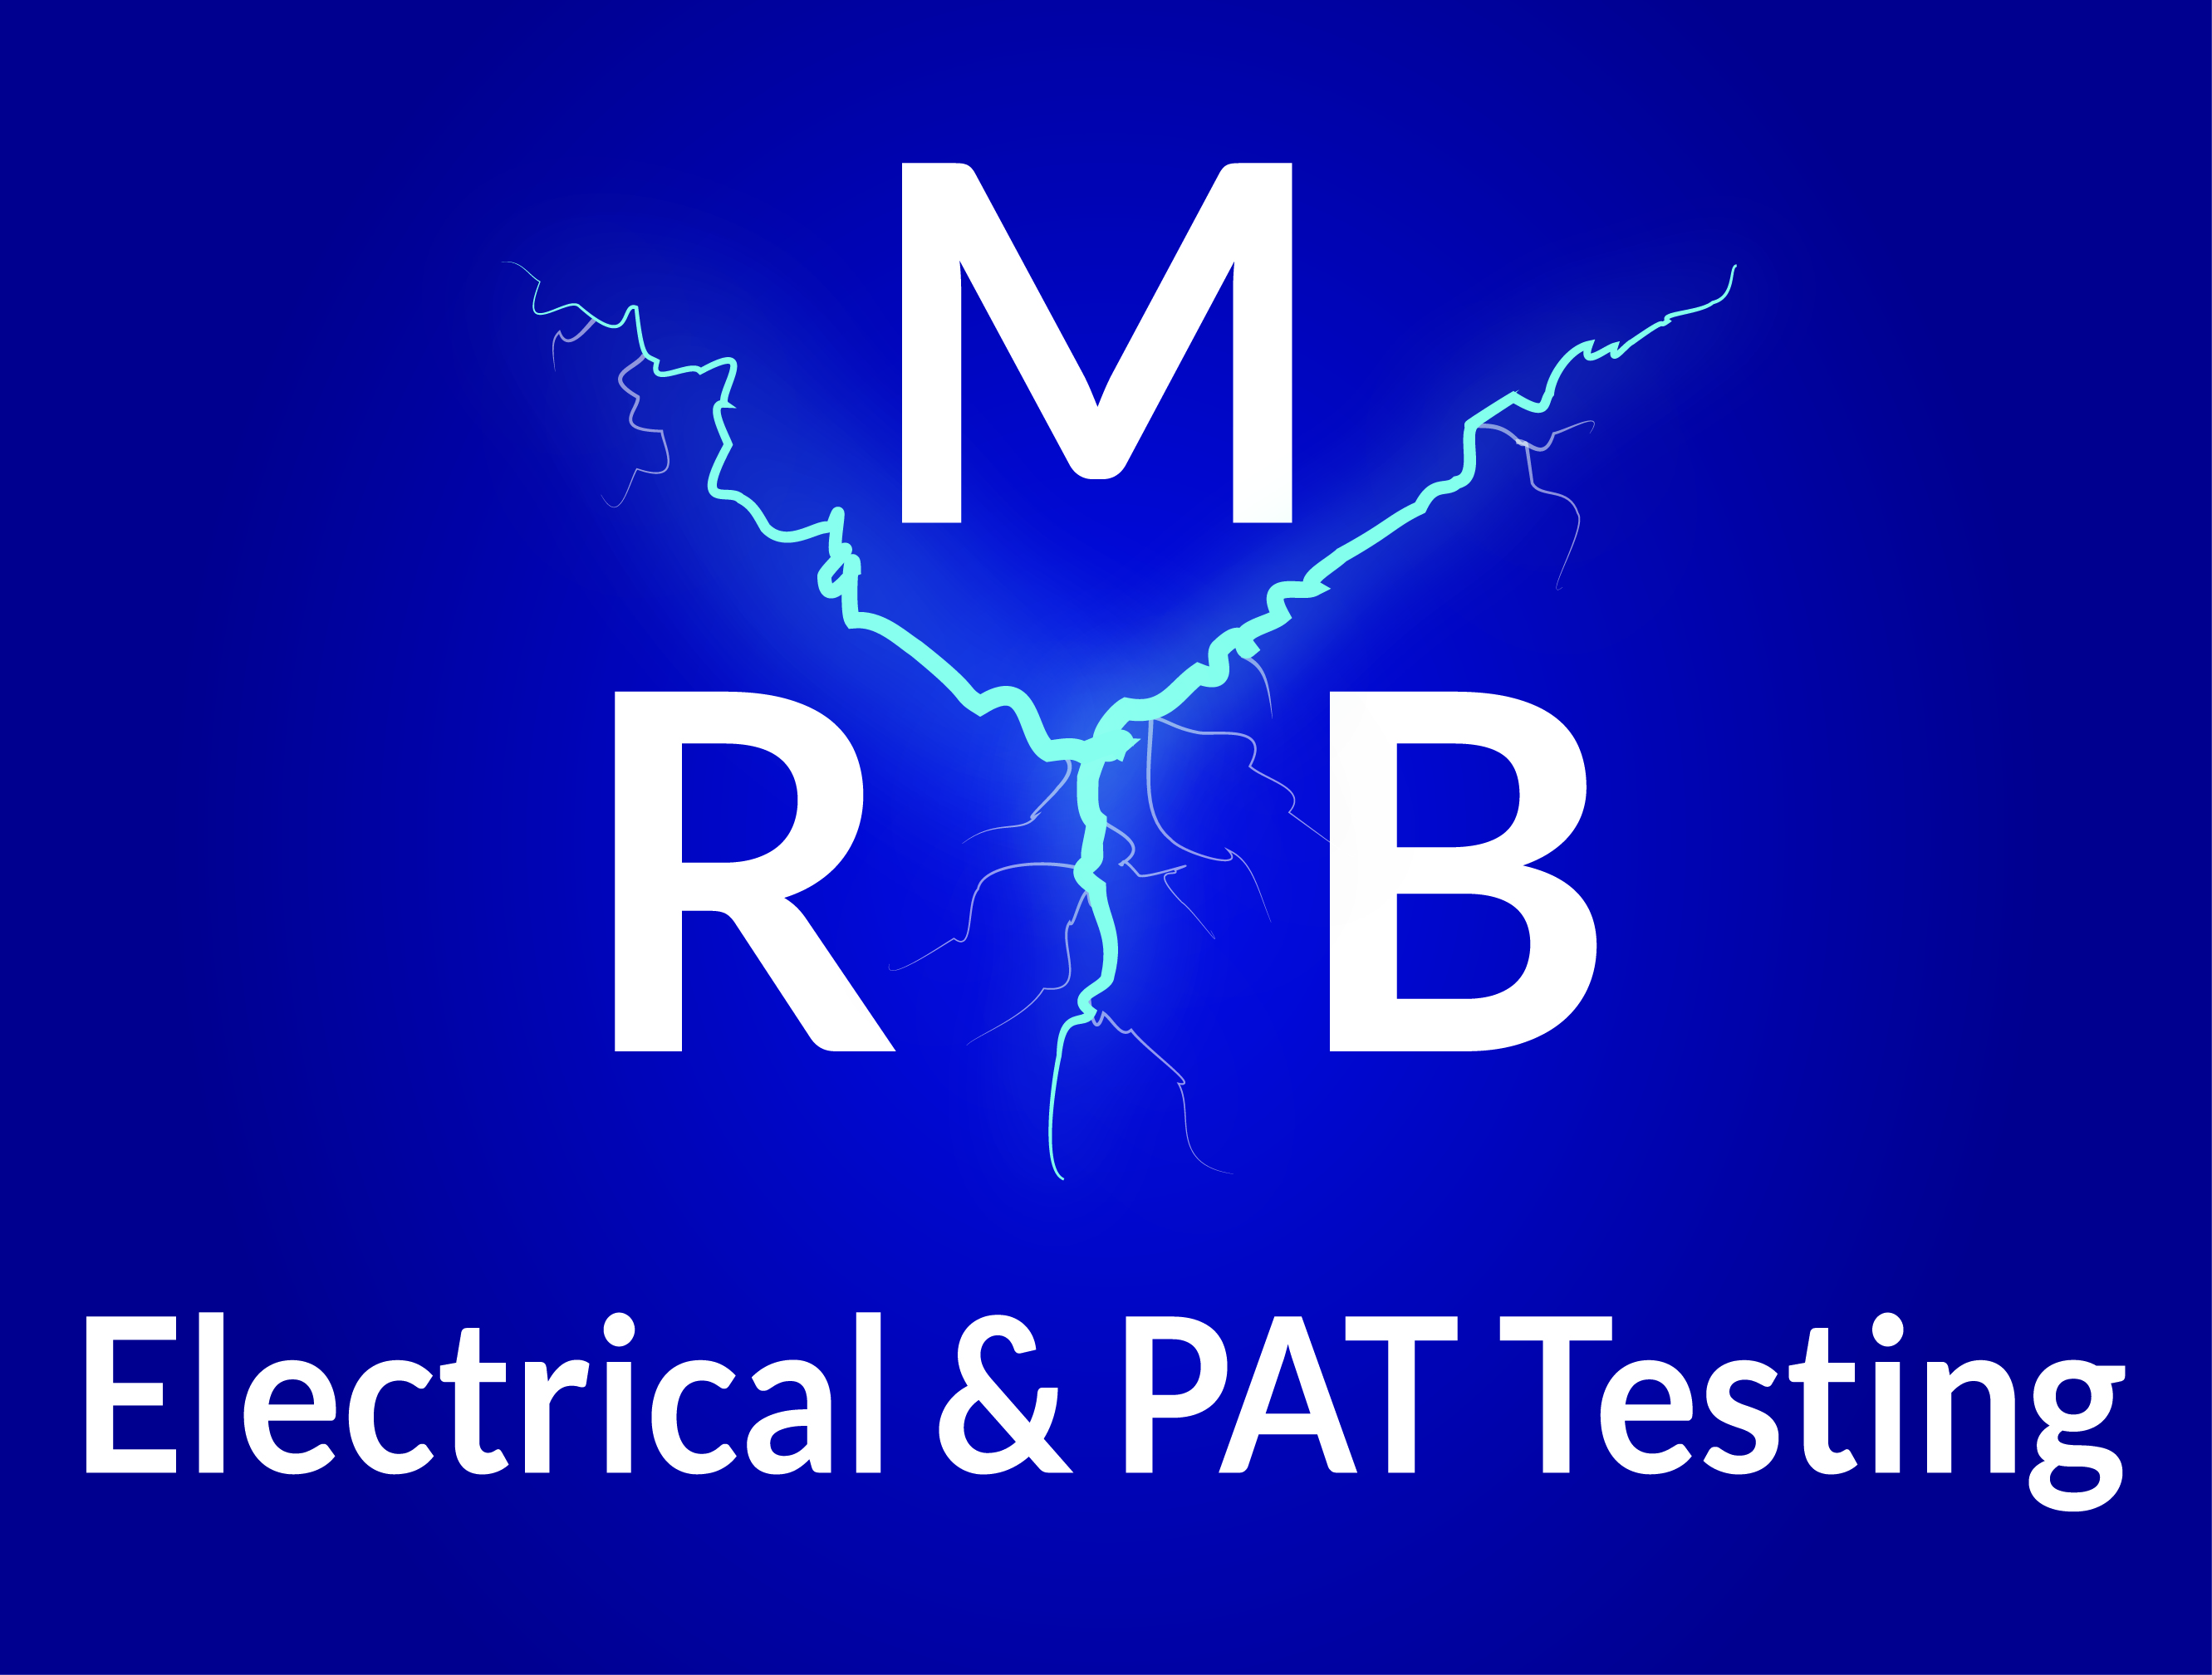 PAT Testing Frequency